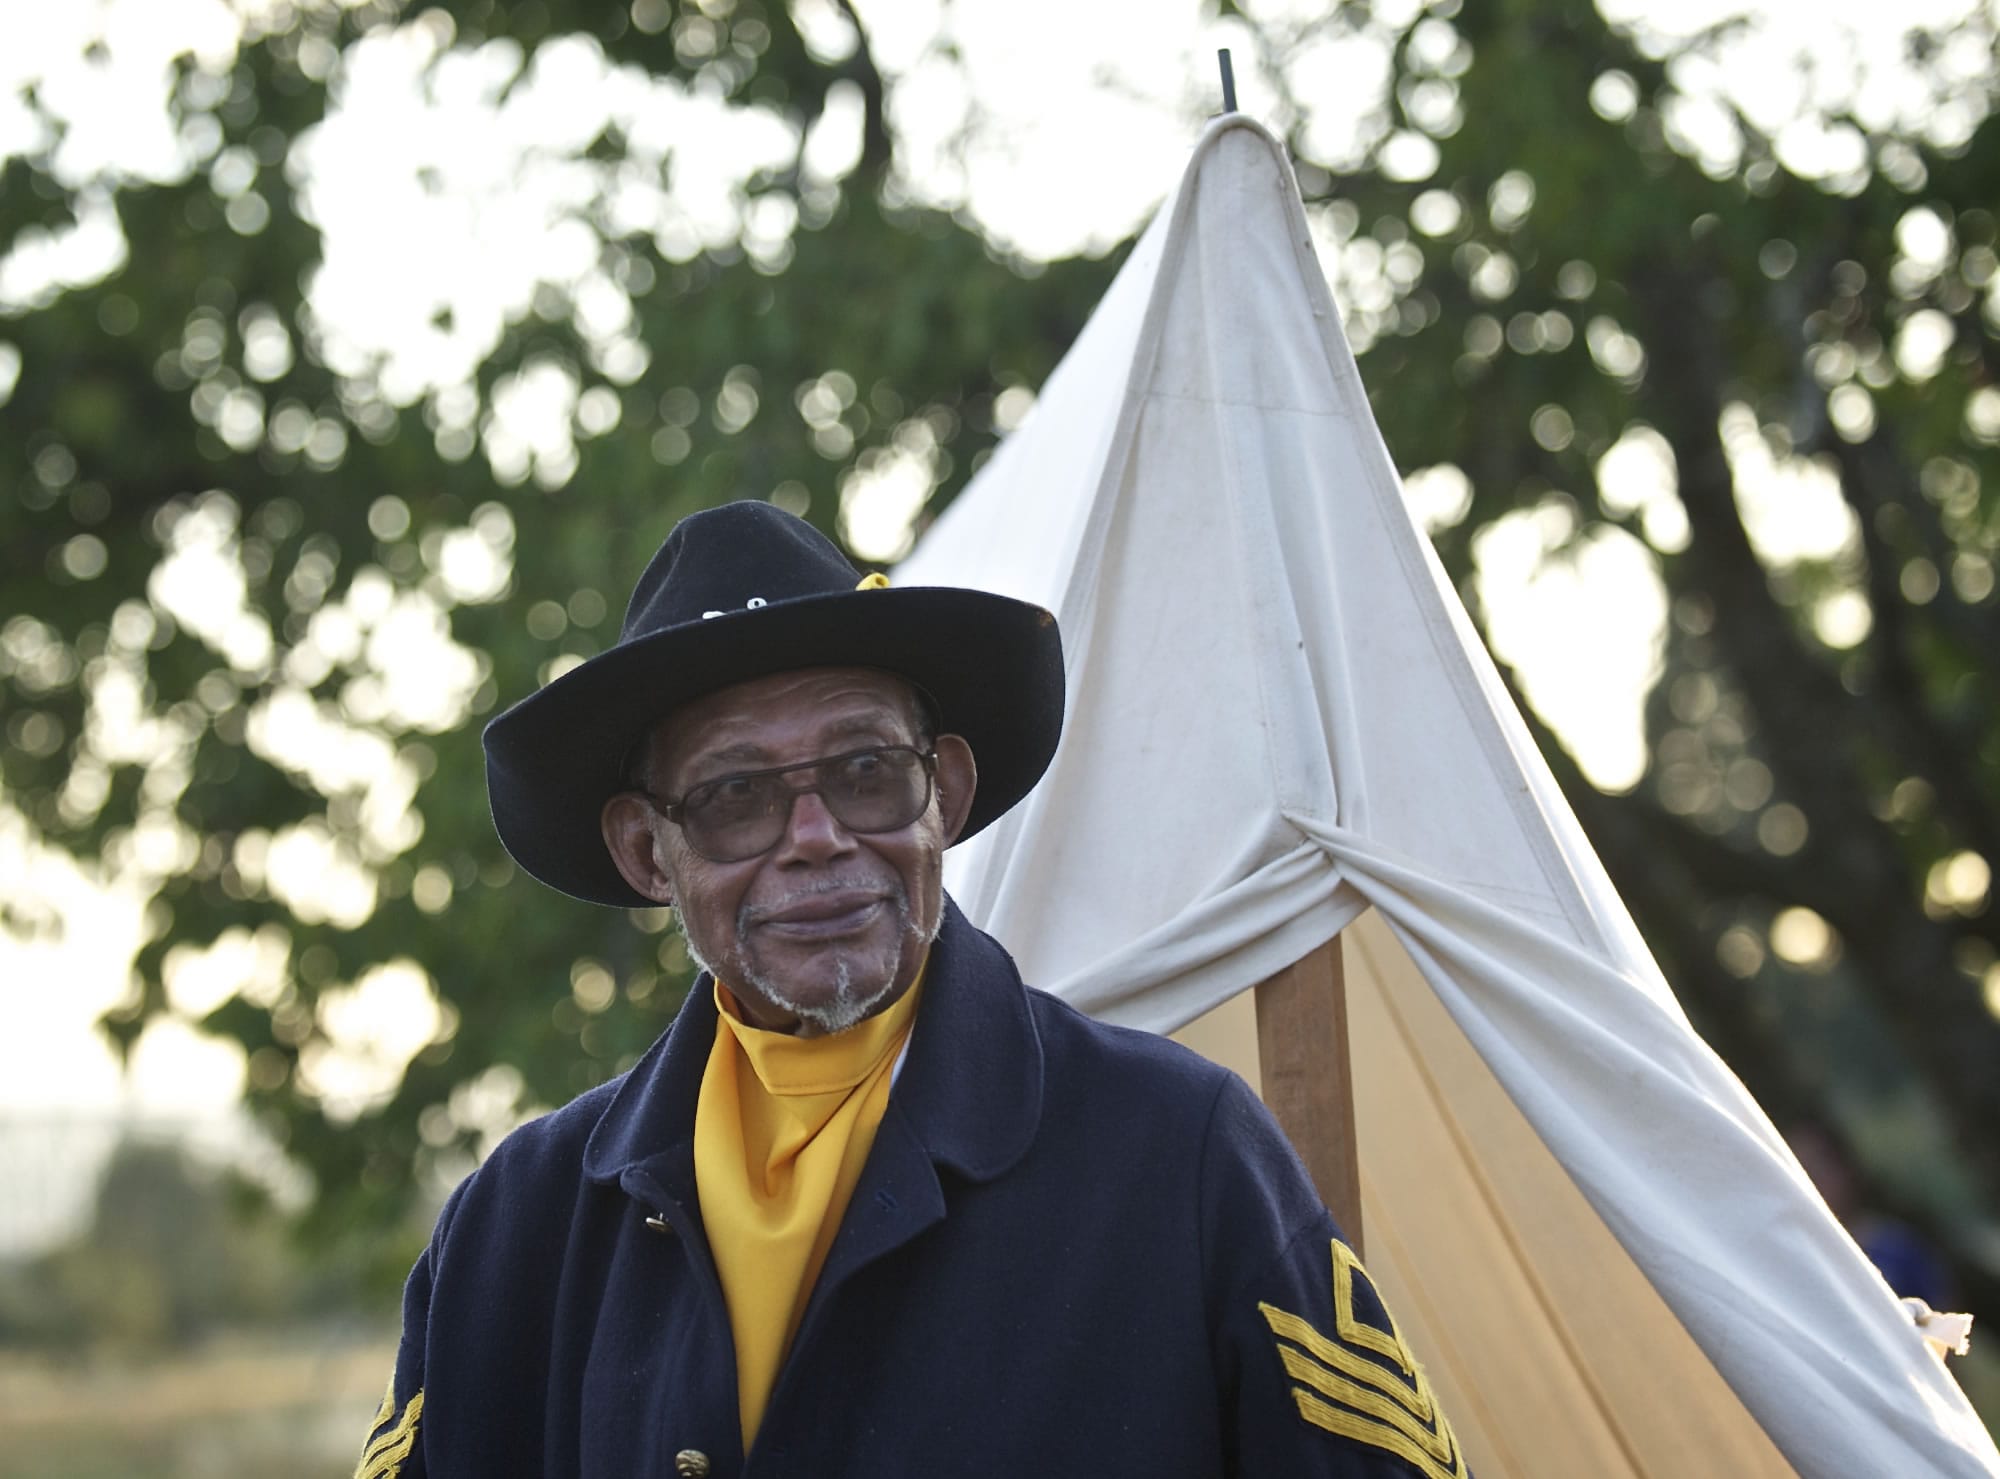 Bill Morehouse, 91, was part of the Buffalo Soldiers exhibit at the Campfires and Candlelight event Saturday at Fort Vancouver National Historic Site.